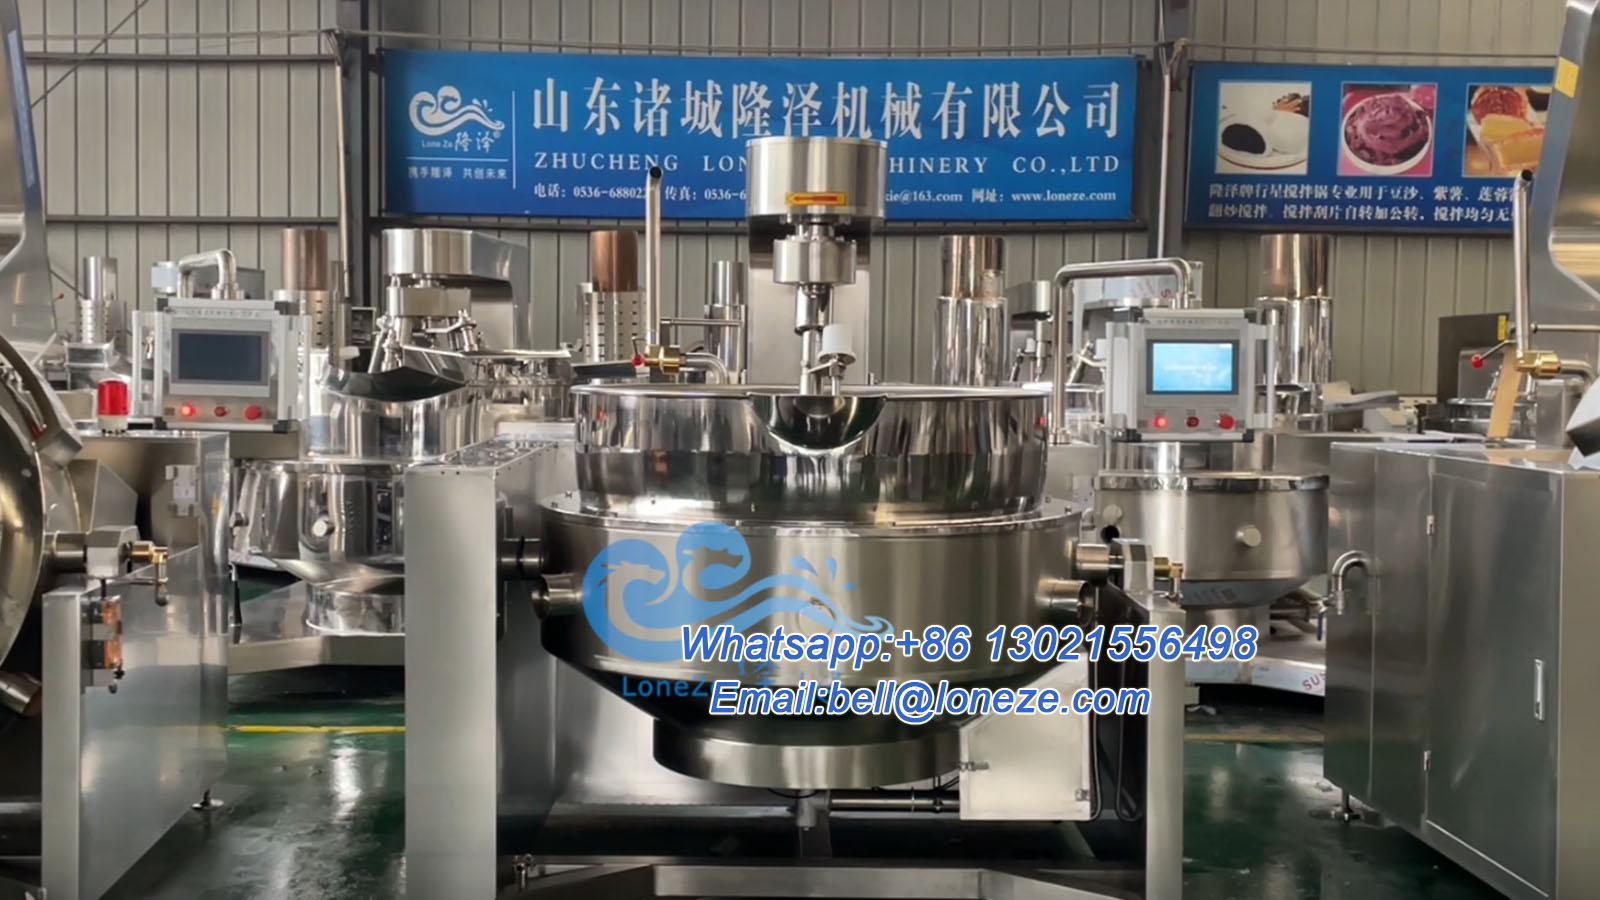 Stainless Steel Industrial Gas Planetary Cooking Mixer Machine